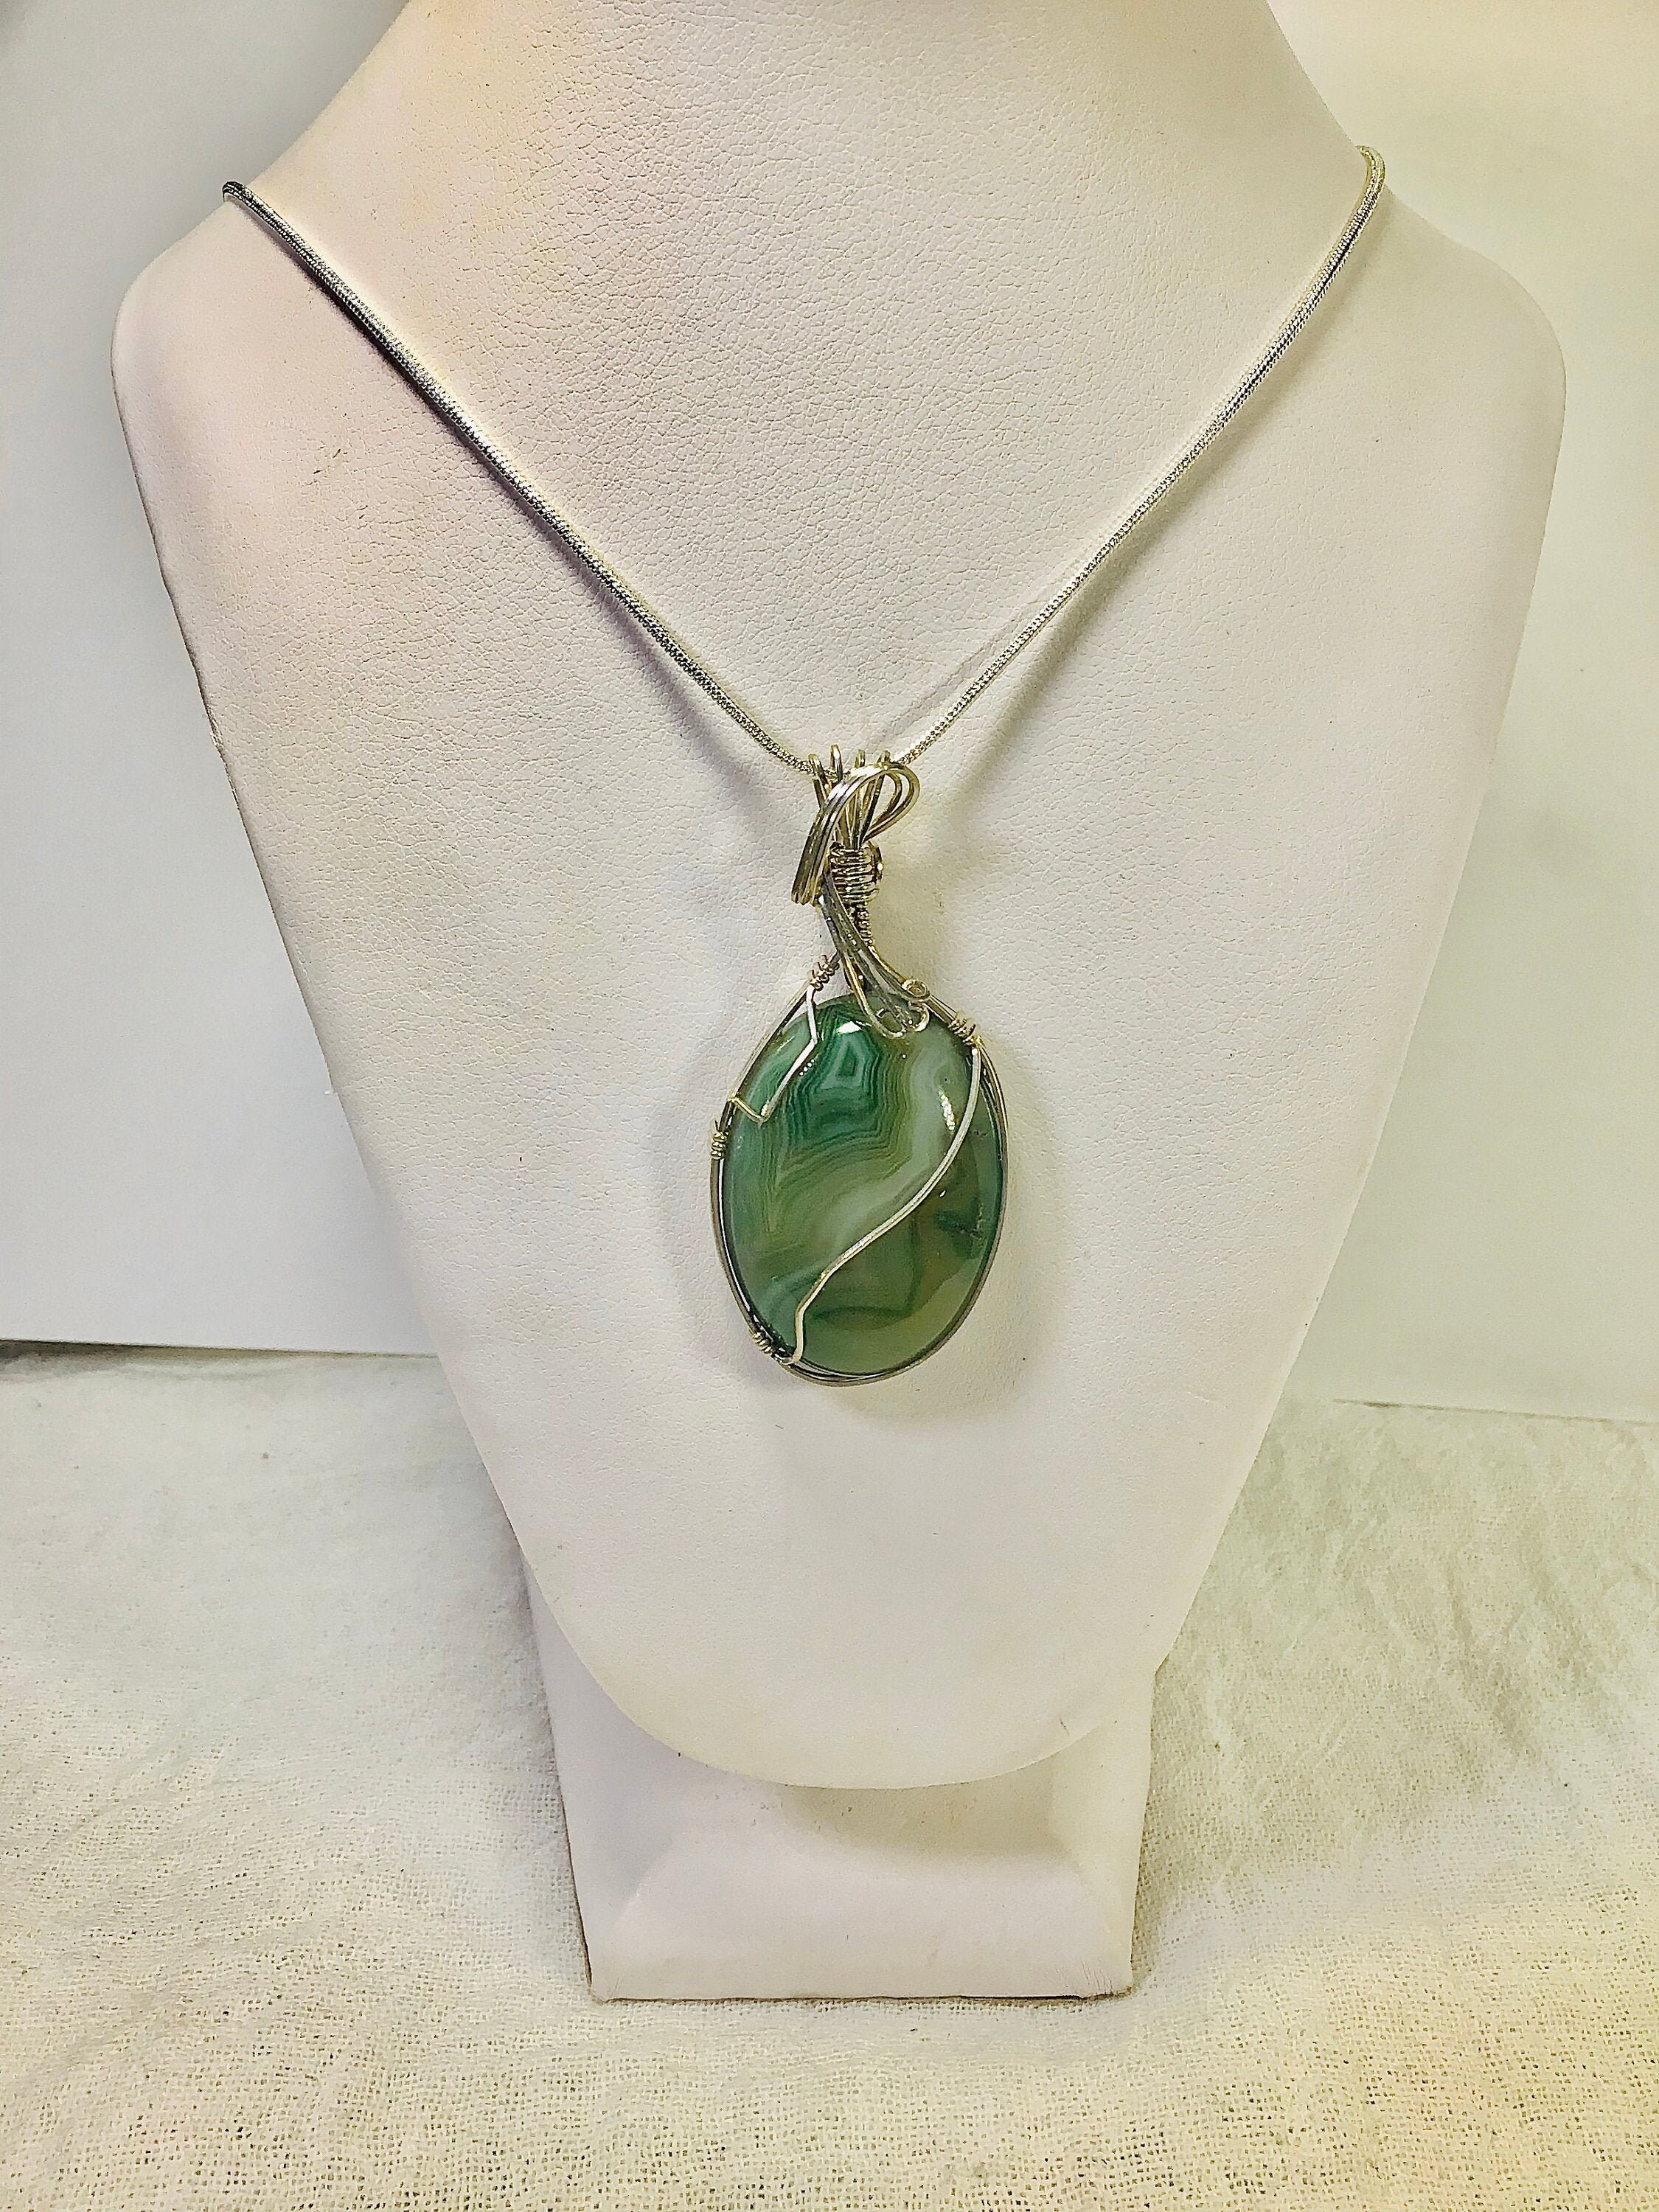 Gorgeous green agate pendant necklace | Etsy